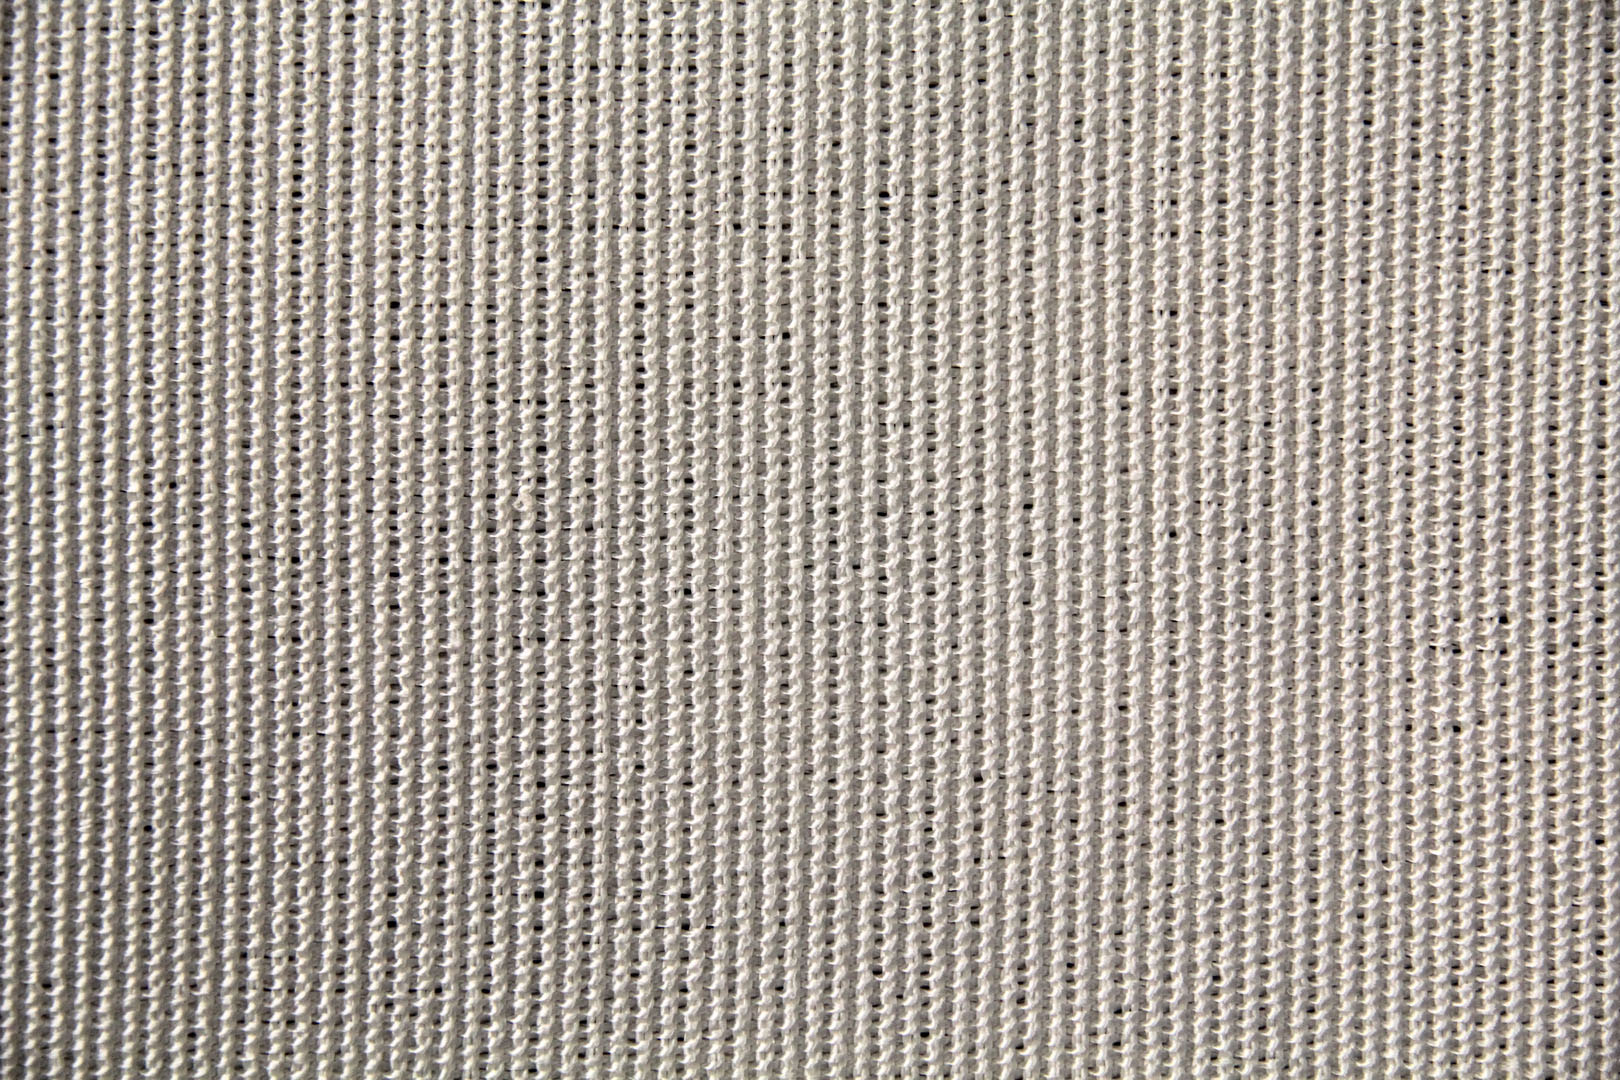 A close up of the fabric for a carpet.